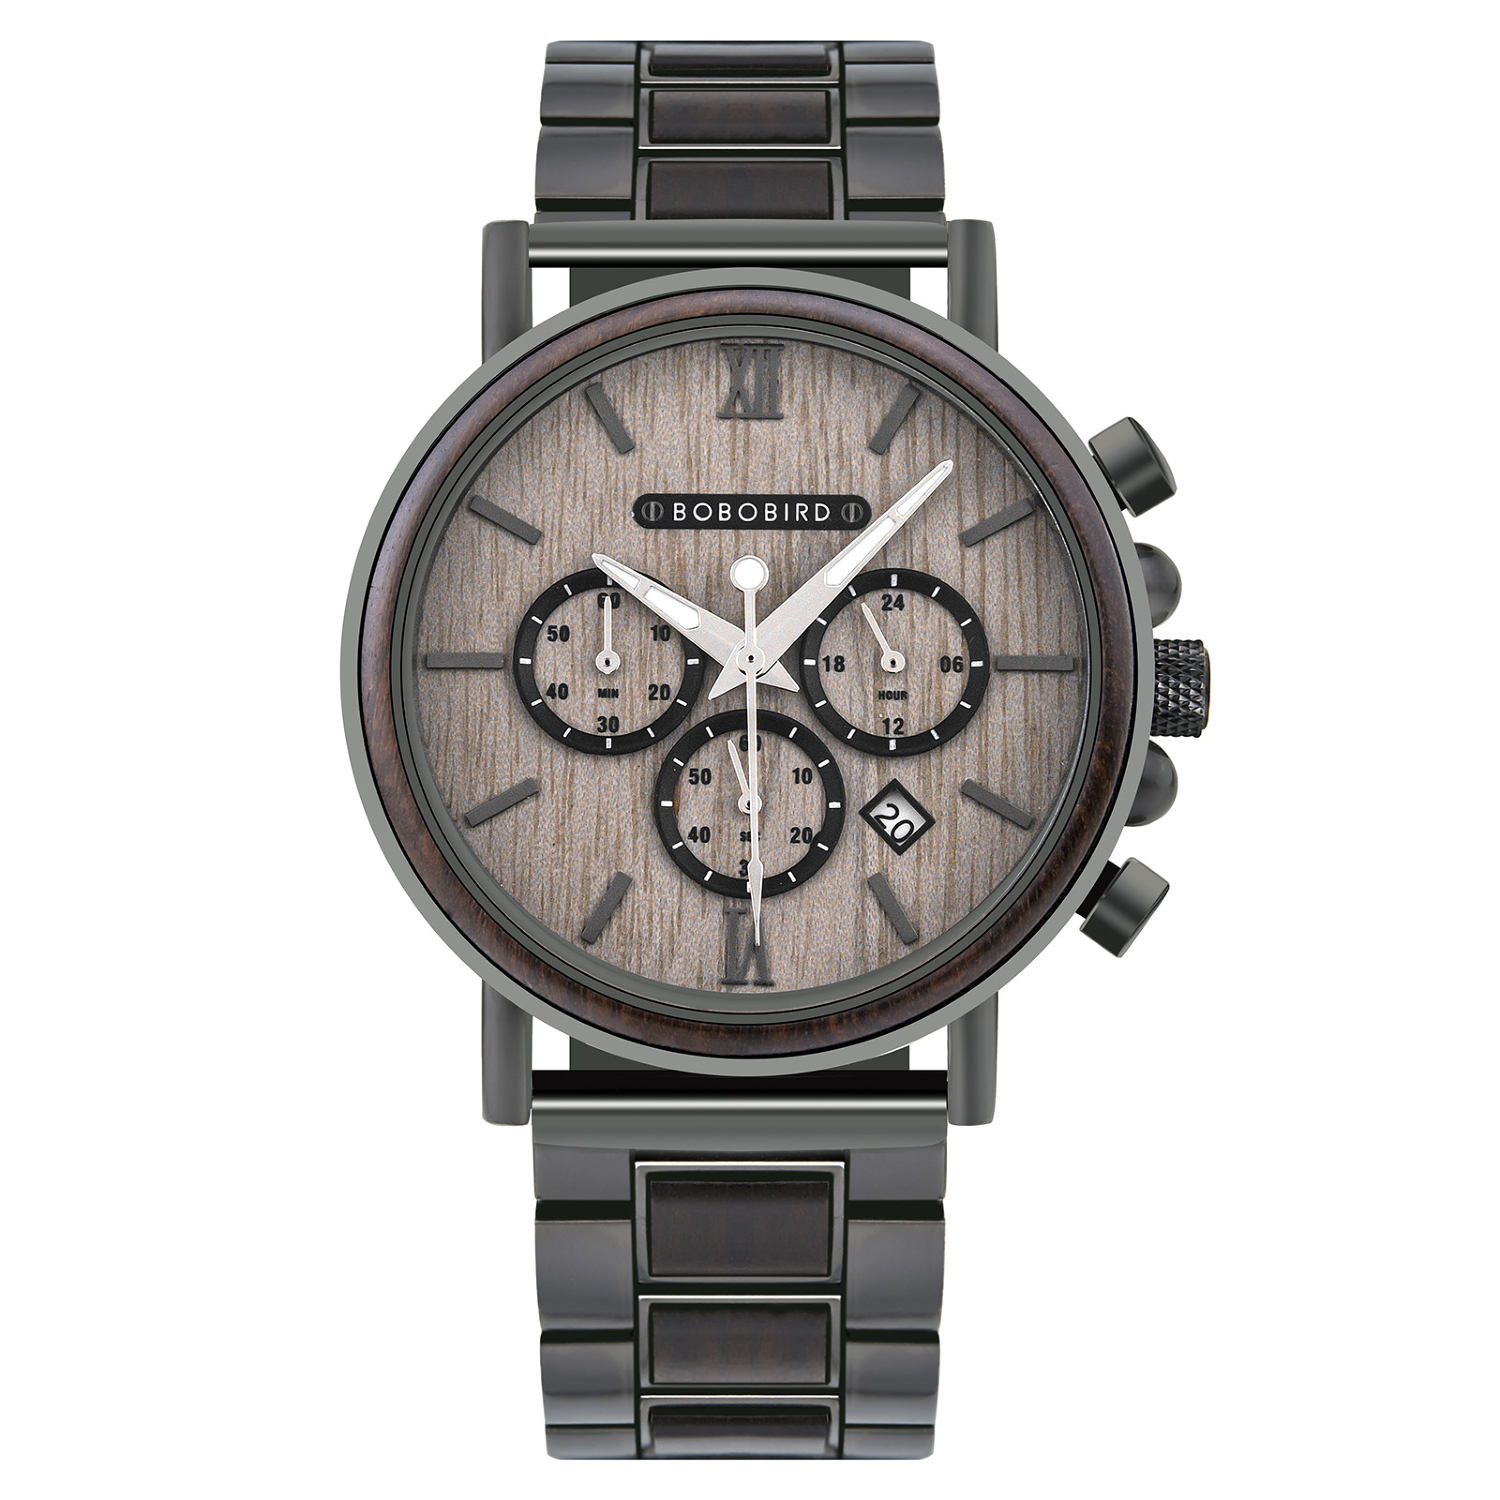 Engraved Wooden Watch For Men Top Brand Luxury Chronograph Military Quartz Watches GT050-2A